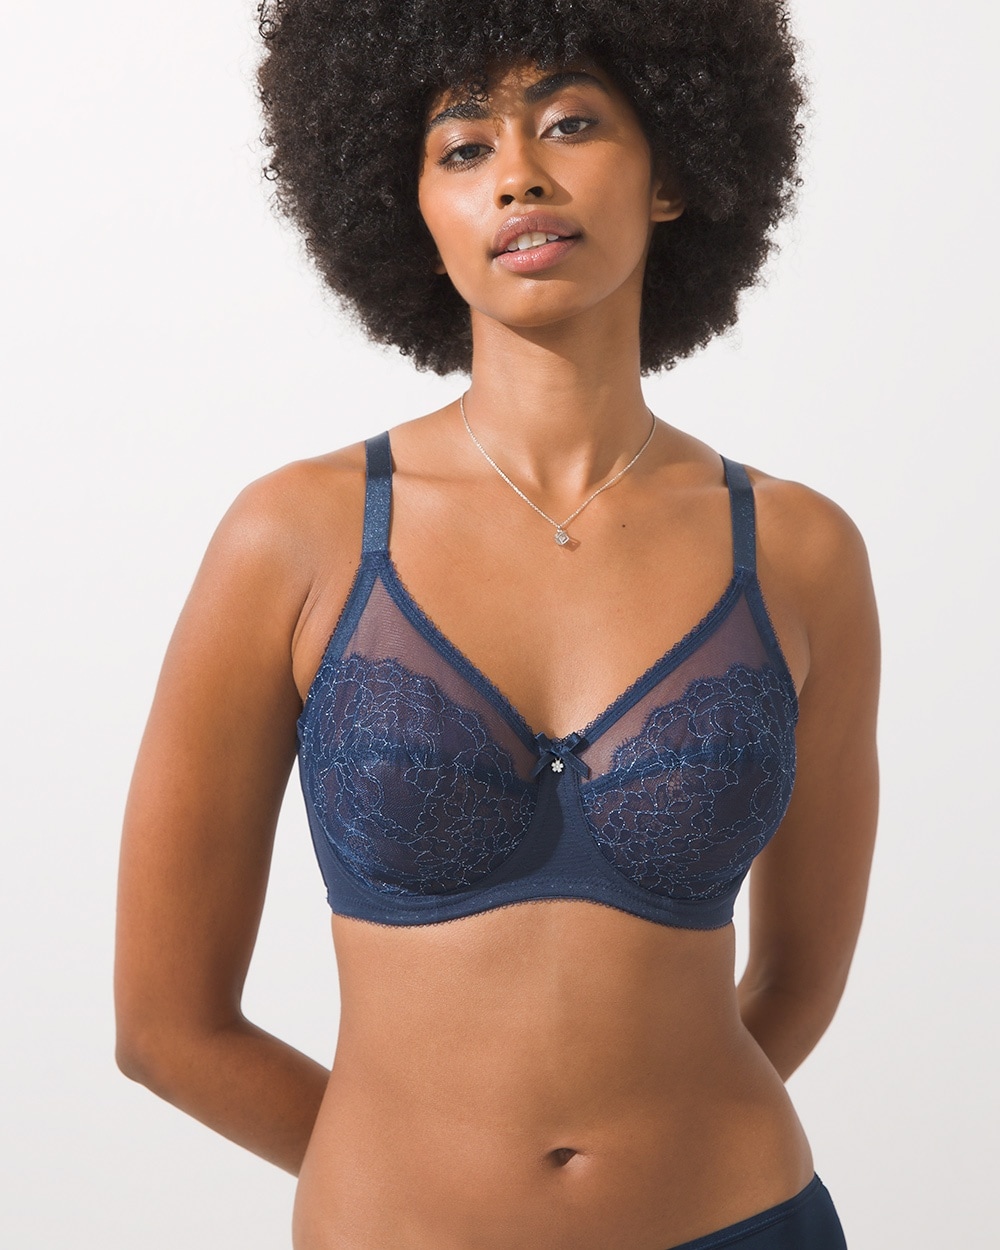 Wacoal Retro Chic Full Figure Unlined Lace Underwire Bra video preview image, click to start video